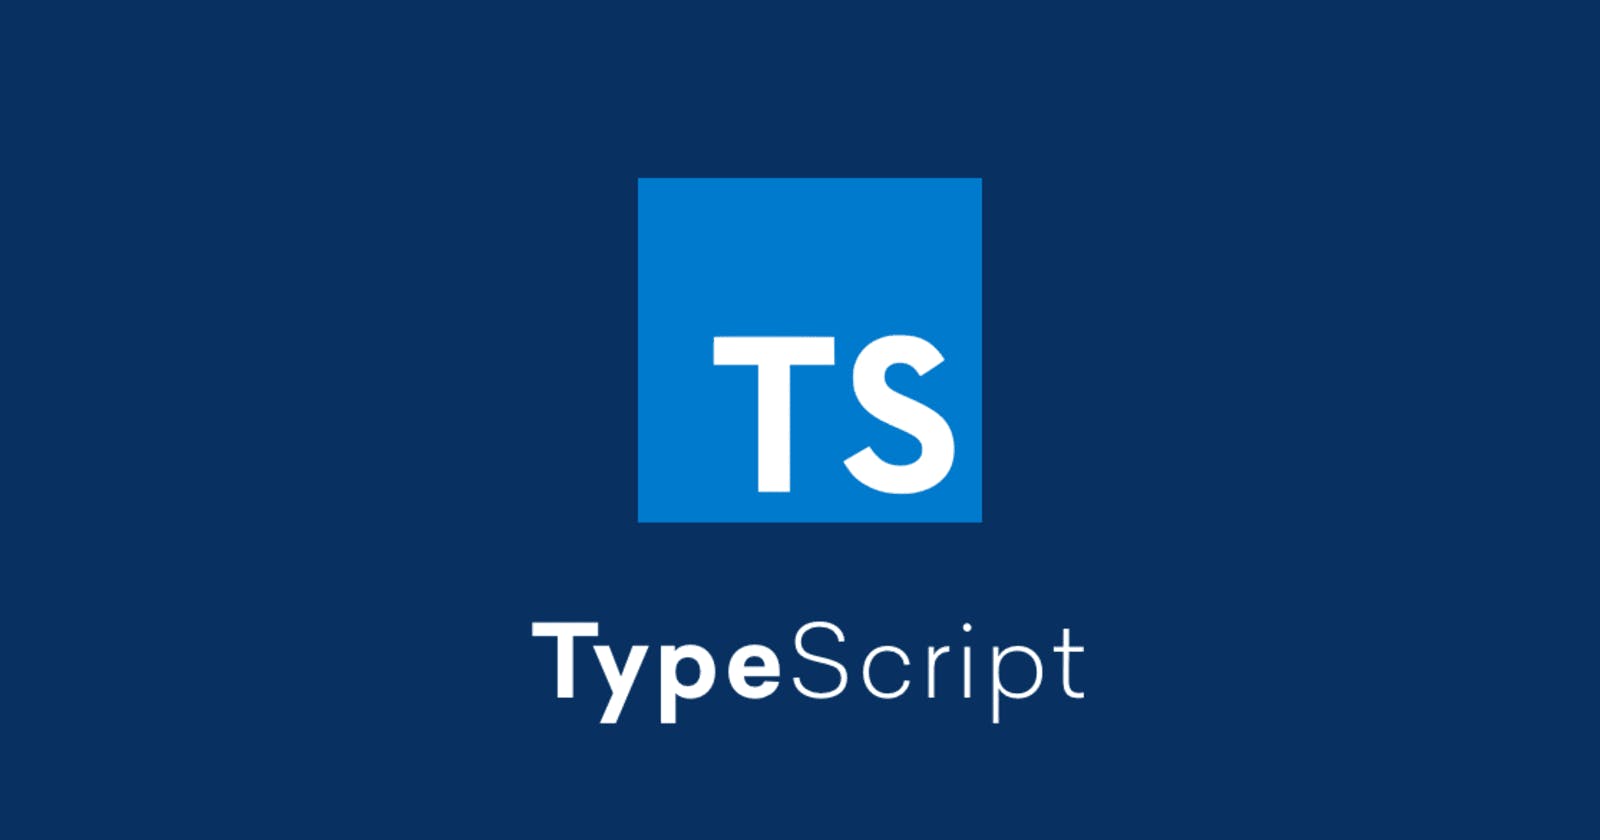 Code with Typescript will be useful